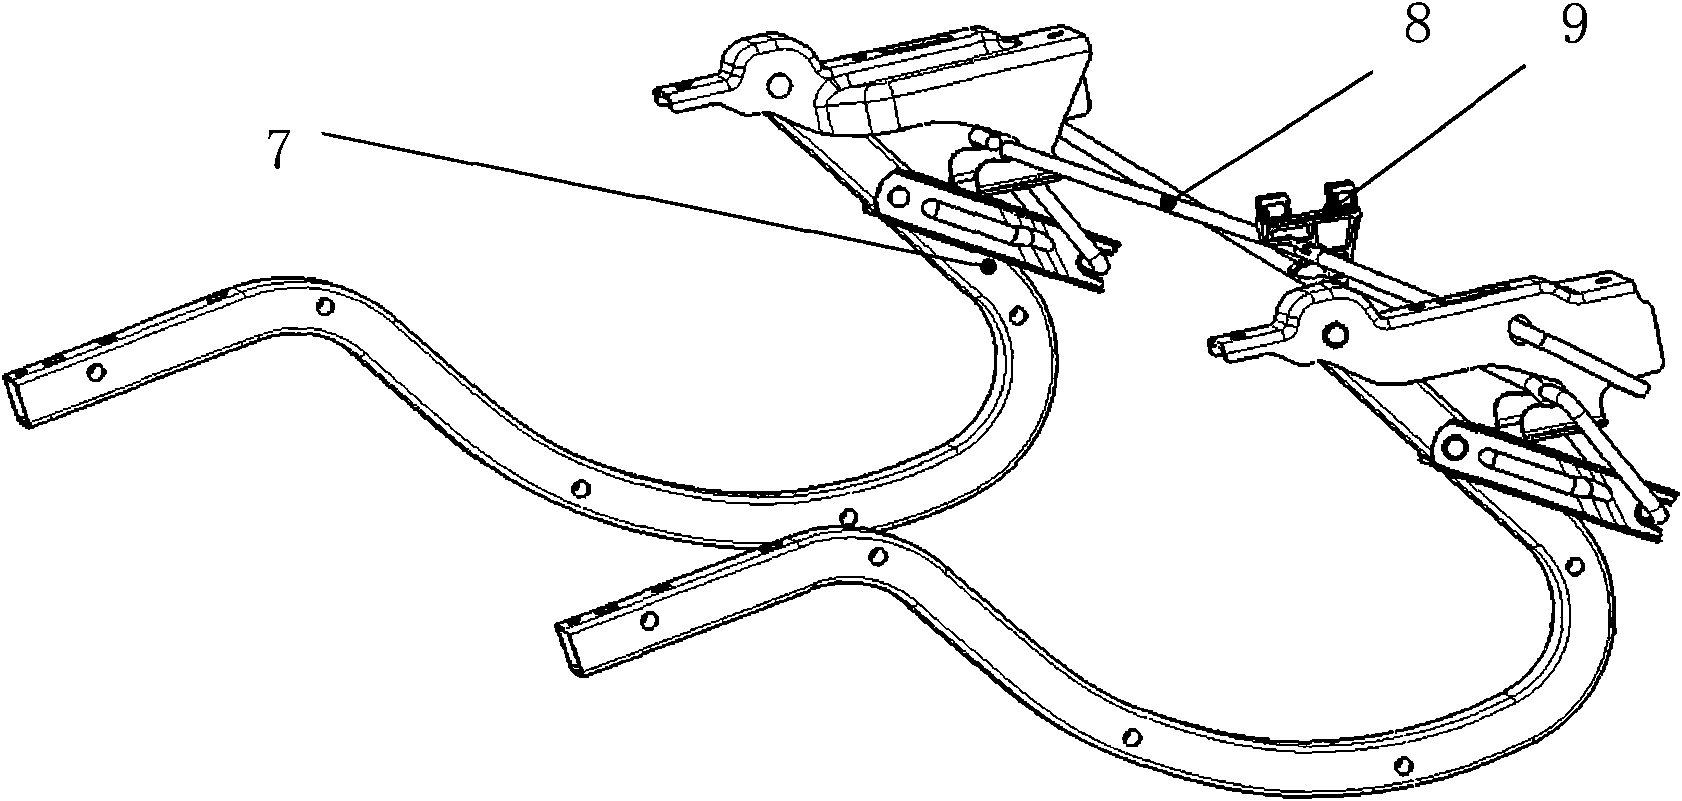 Power assisting mechanism for opening vehicle trunk lid